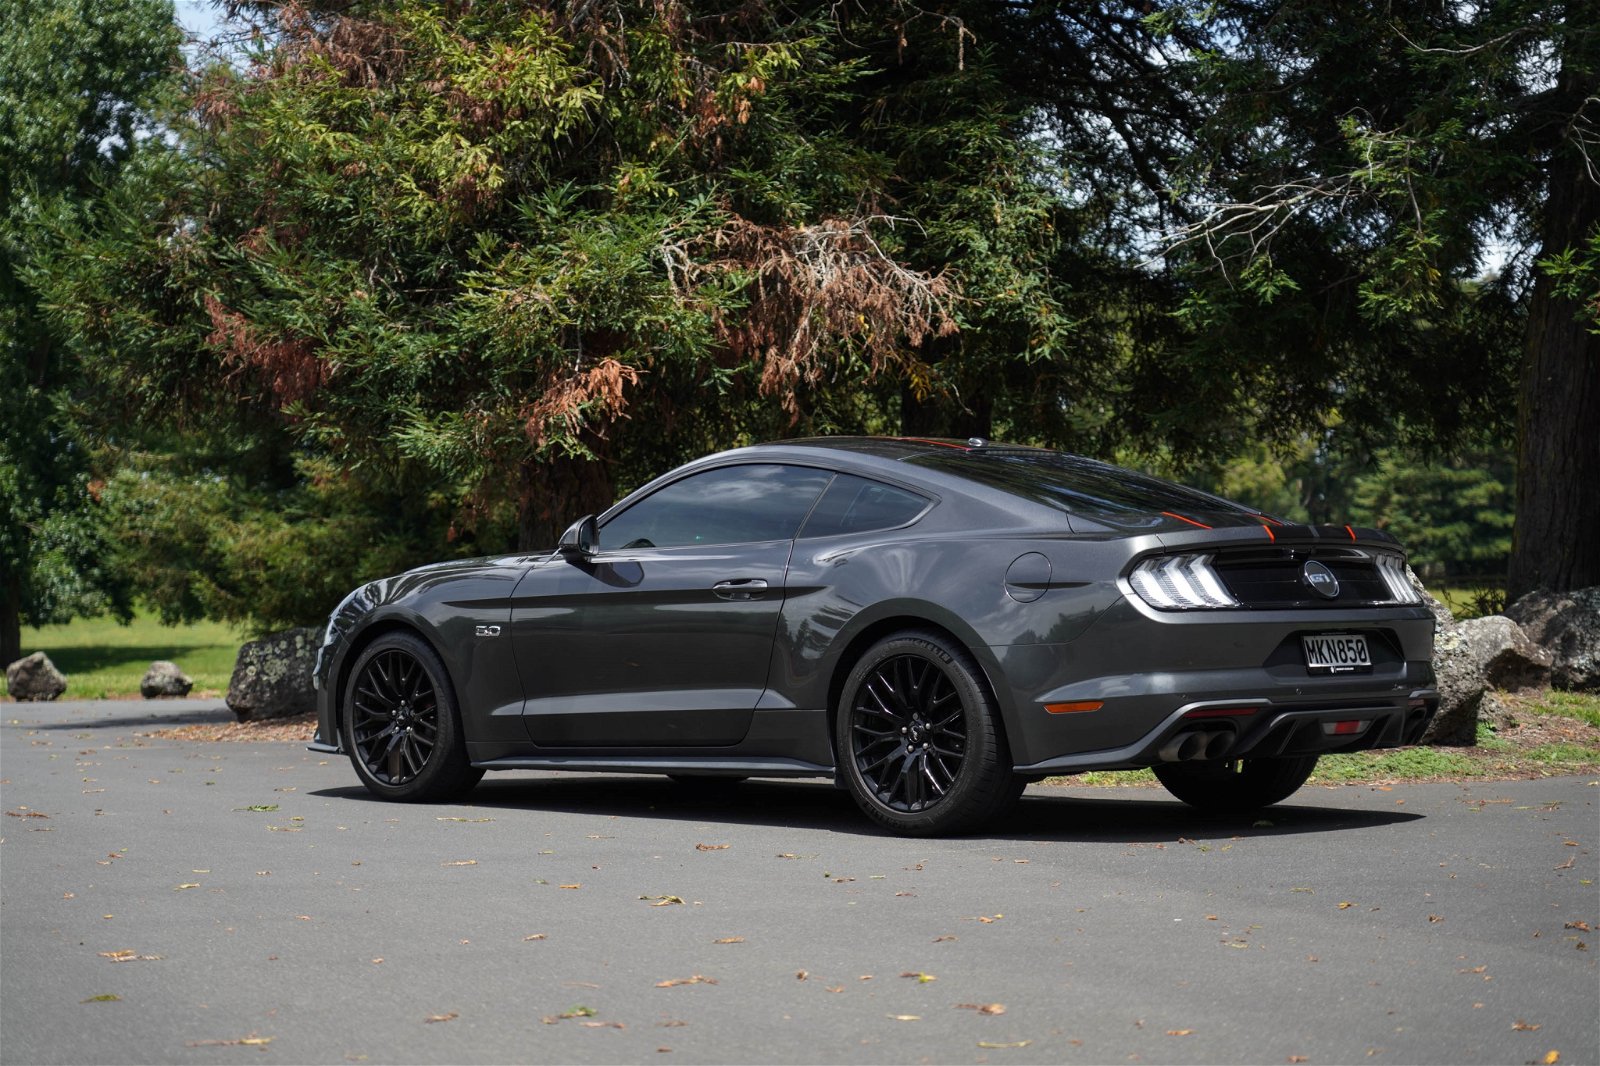 2019 Ford Mustang GT 5.0 V8 Petrol 10A 2Dr Coupe